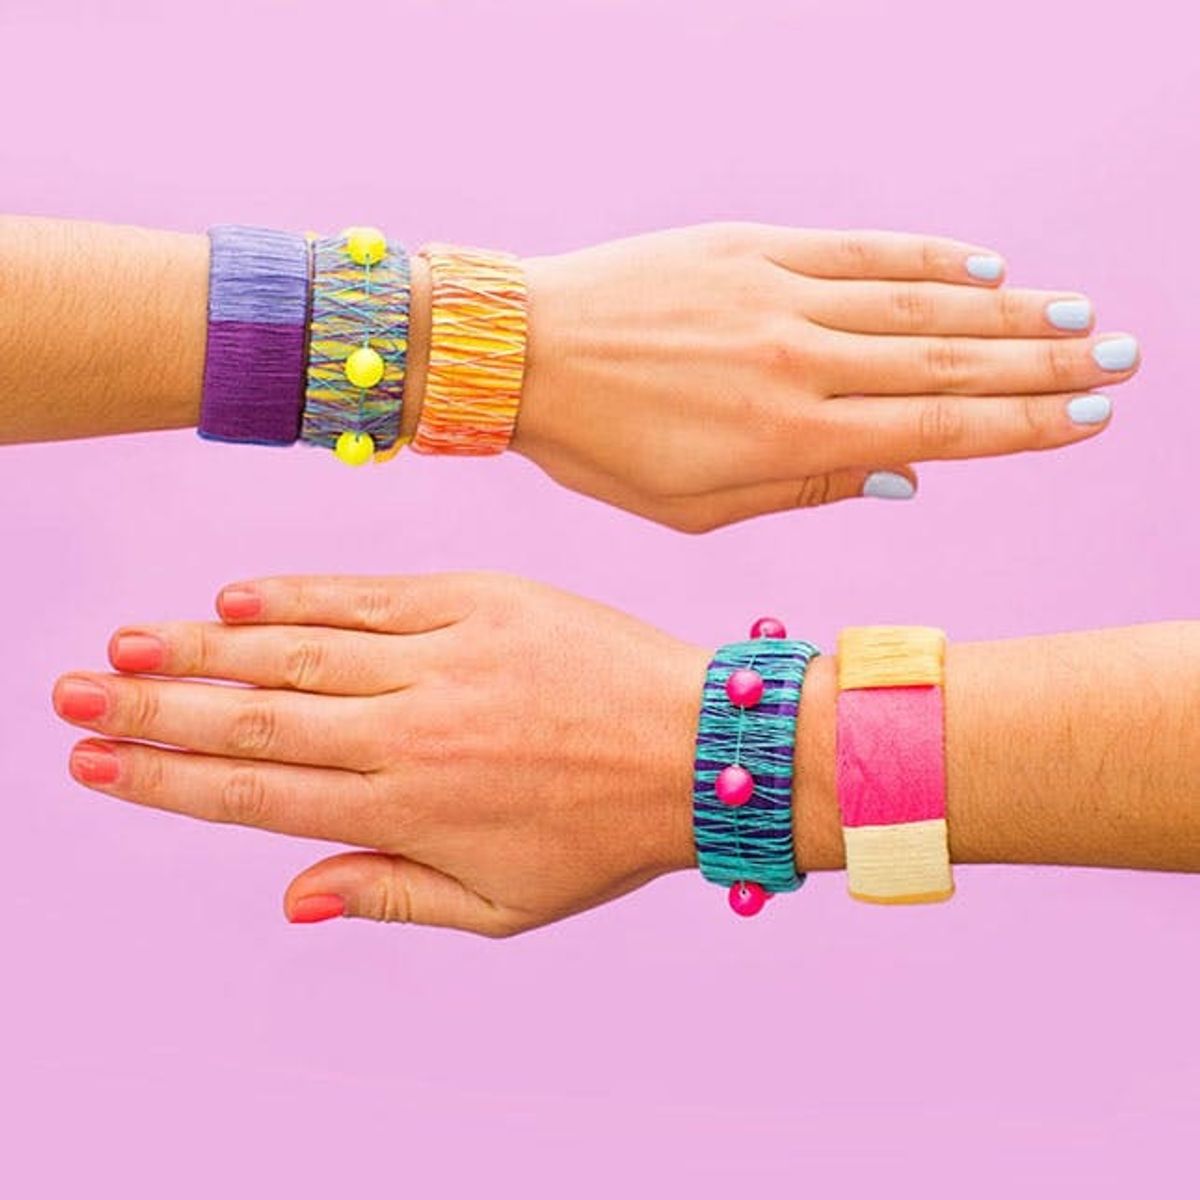 Use This Epic Thread Wrapper to Reinvent the ‘90s Slap Bracelet